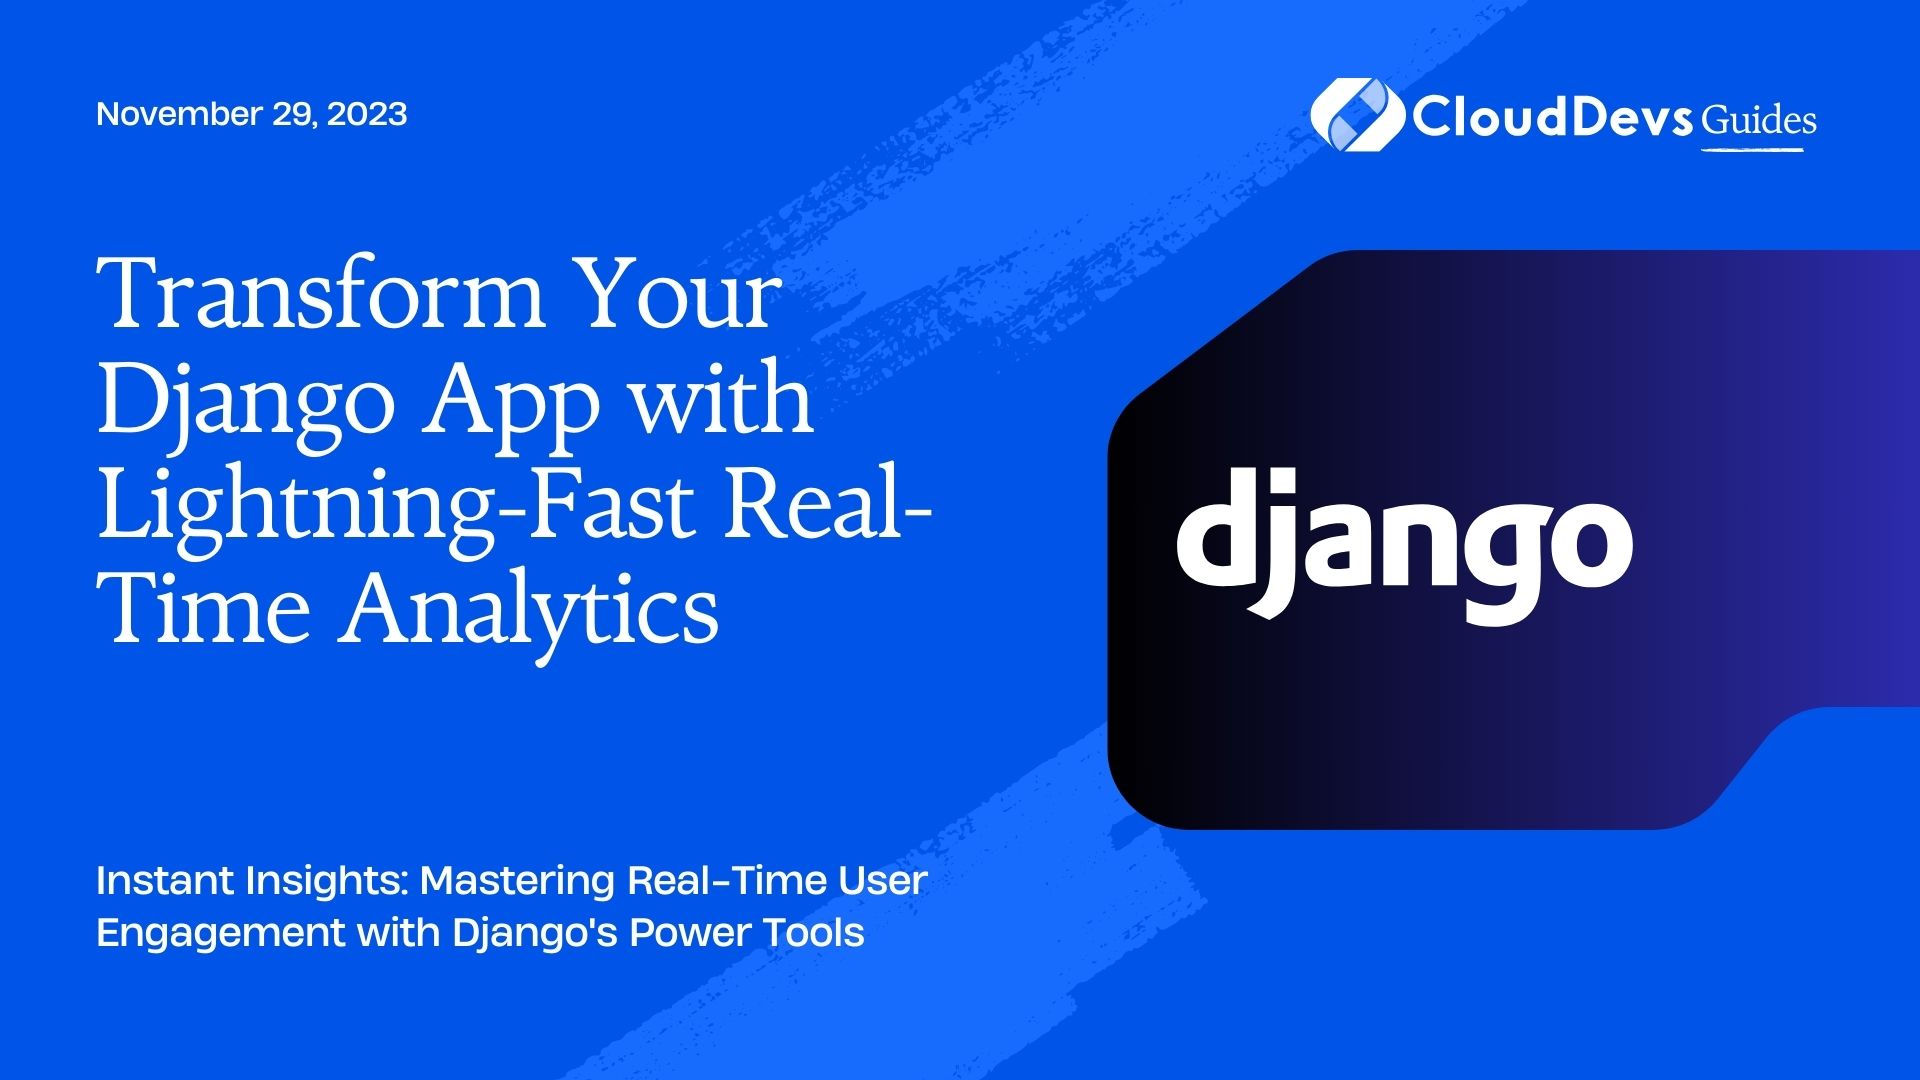 Transform Your Django App with Lightning-Fast Real-Time Analytics